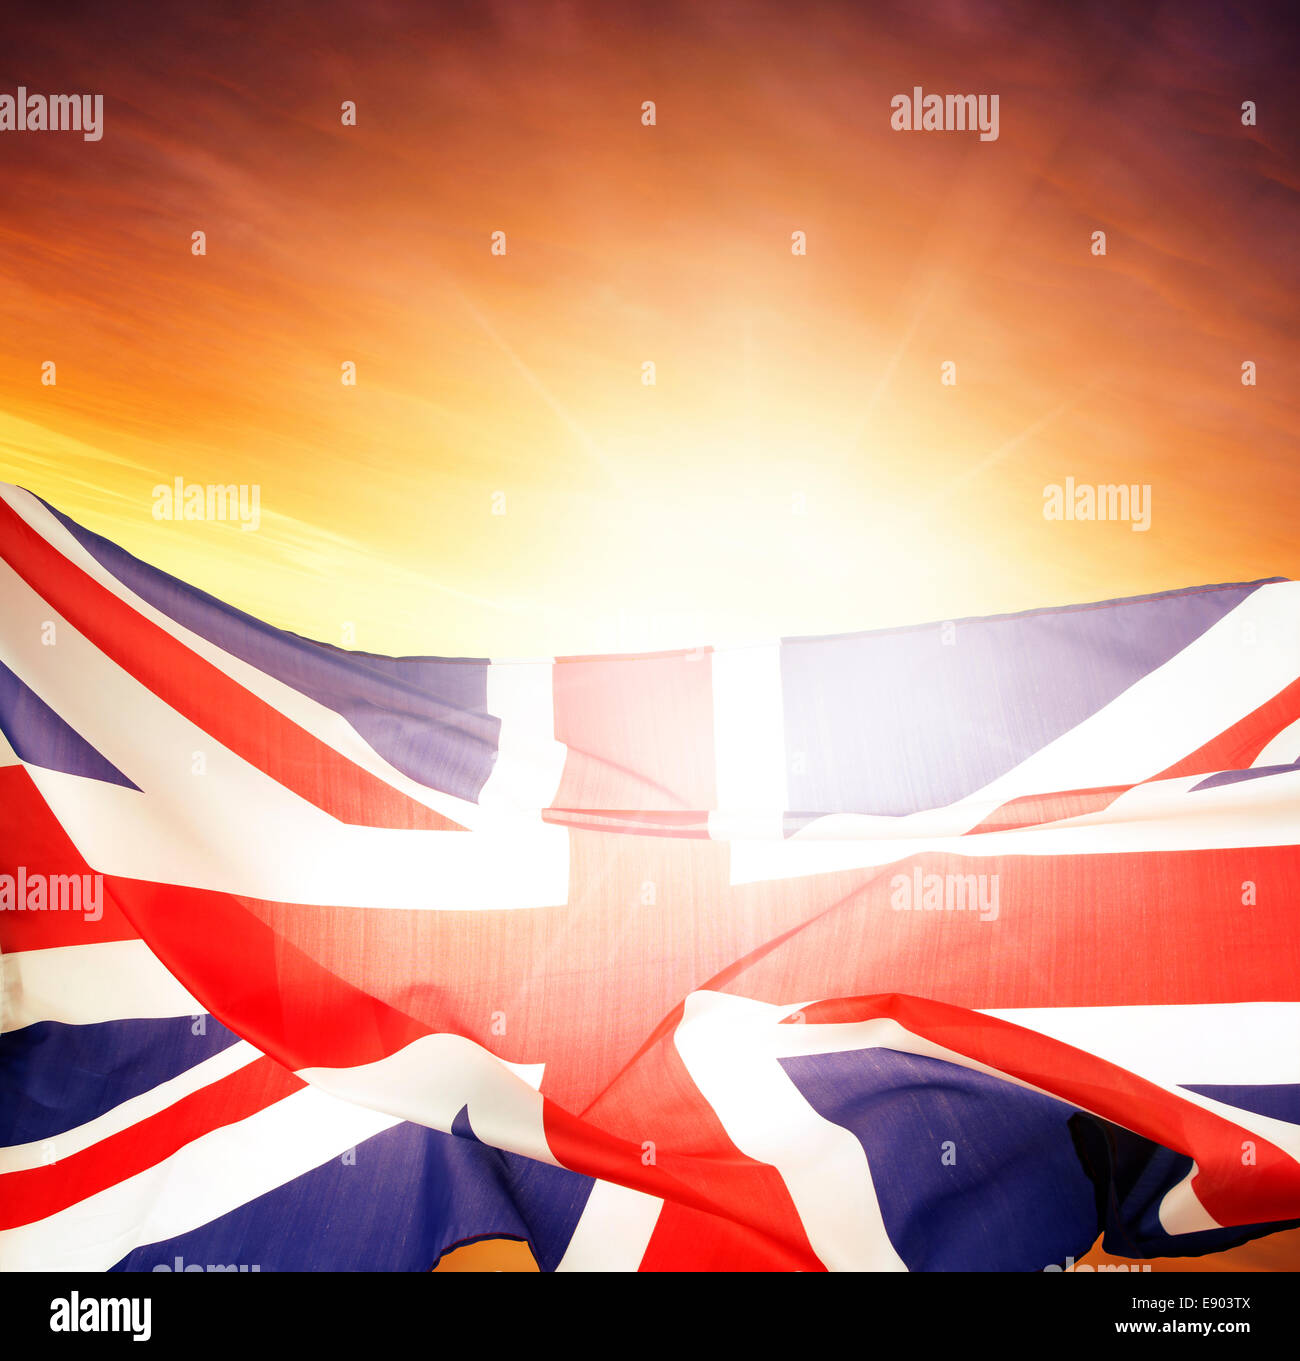 Union Jack flag in front of bright sky Stock Photo